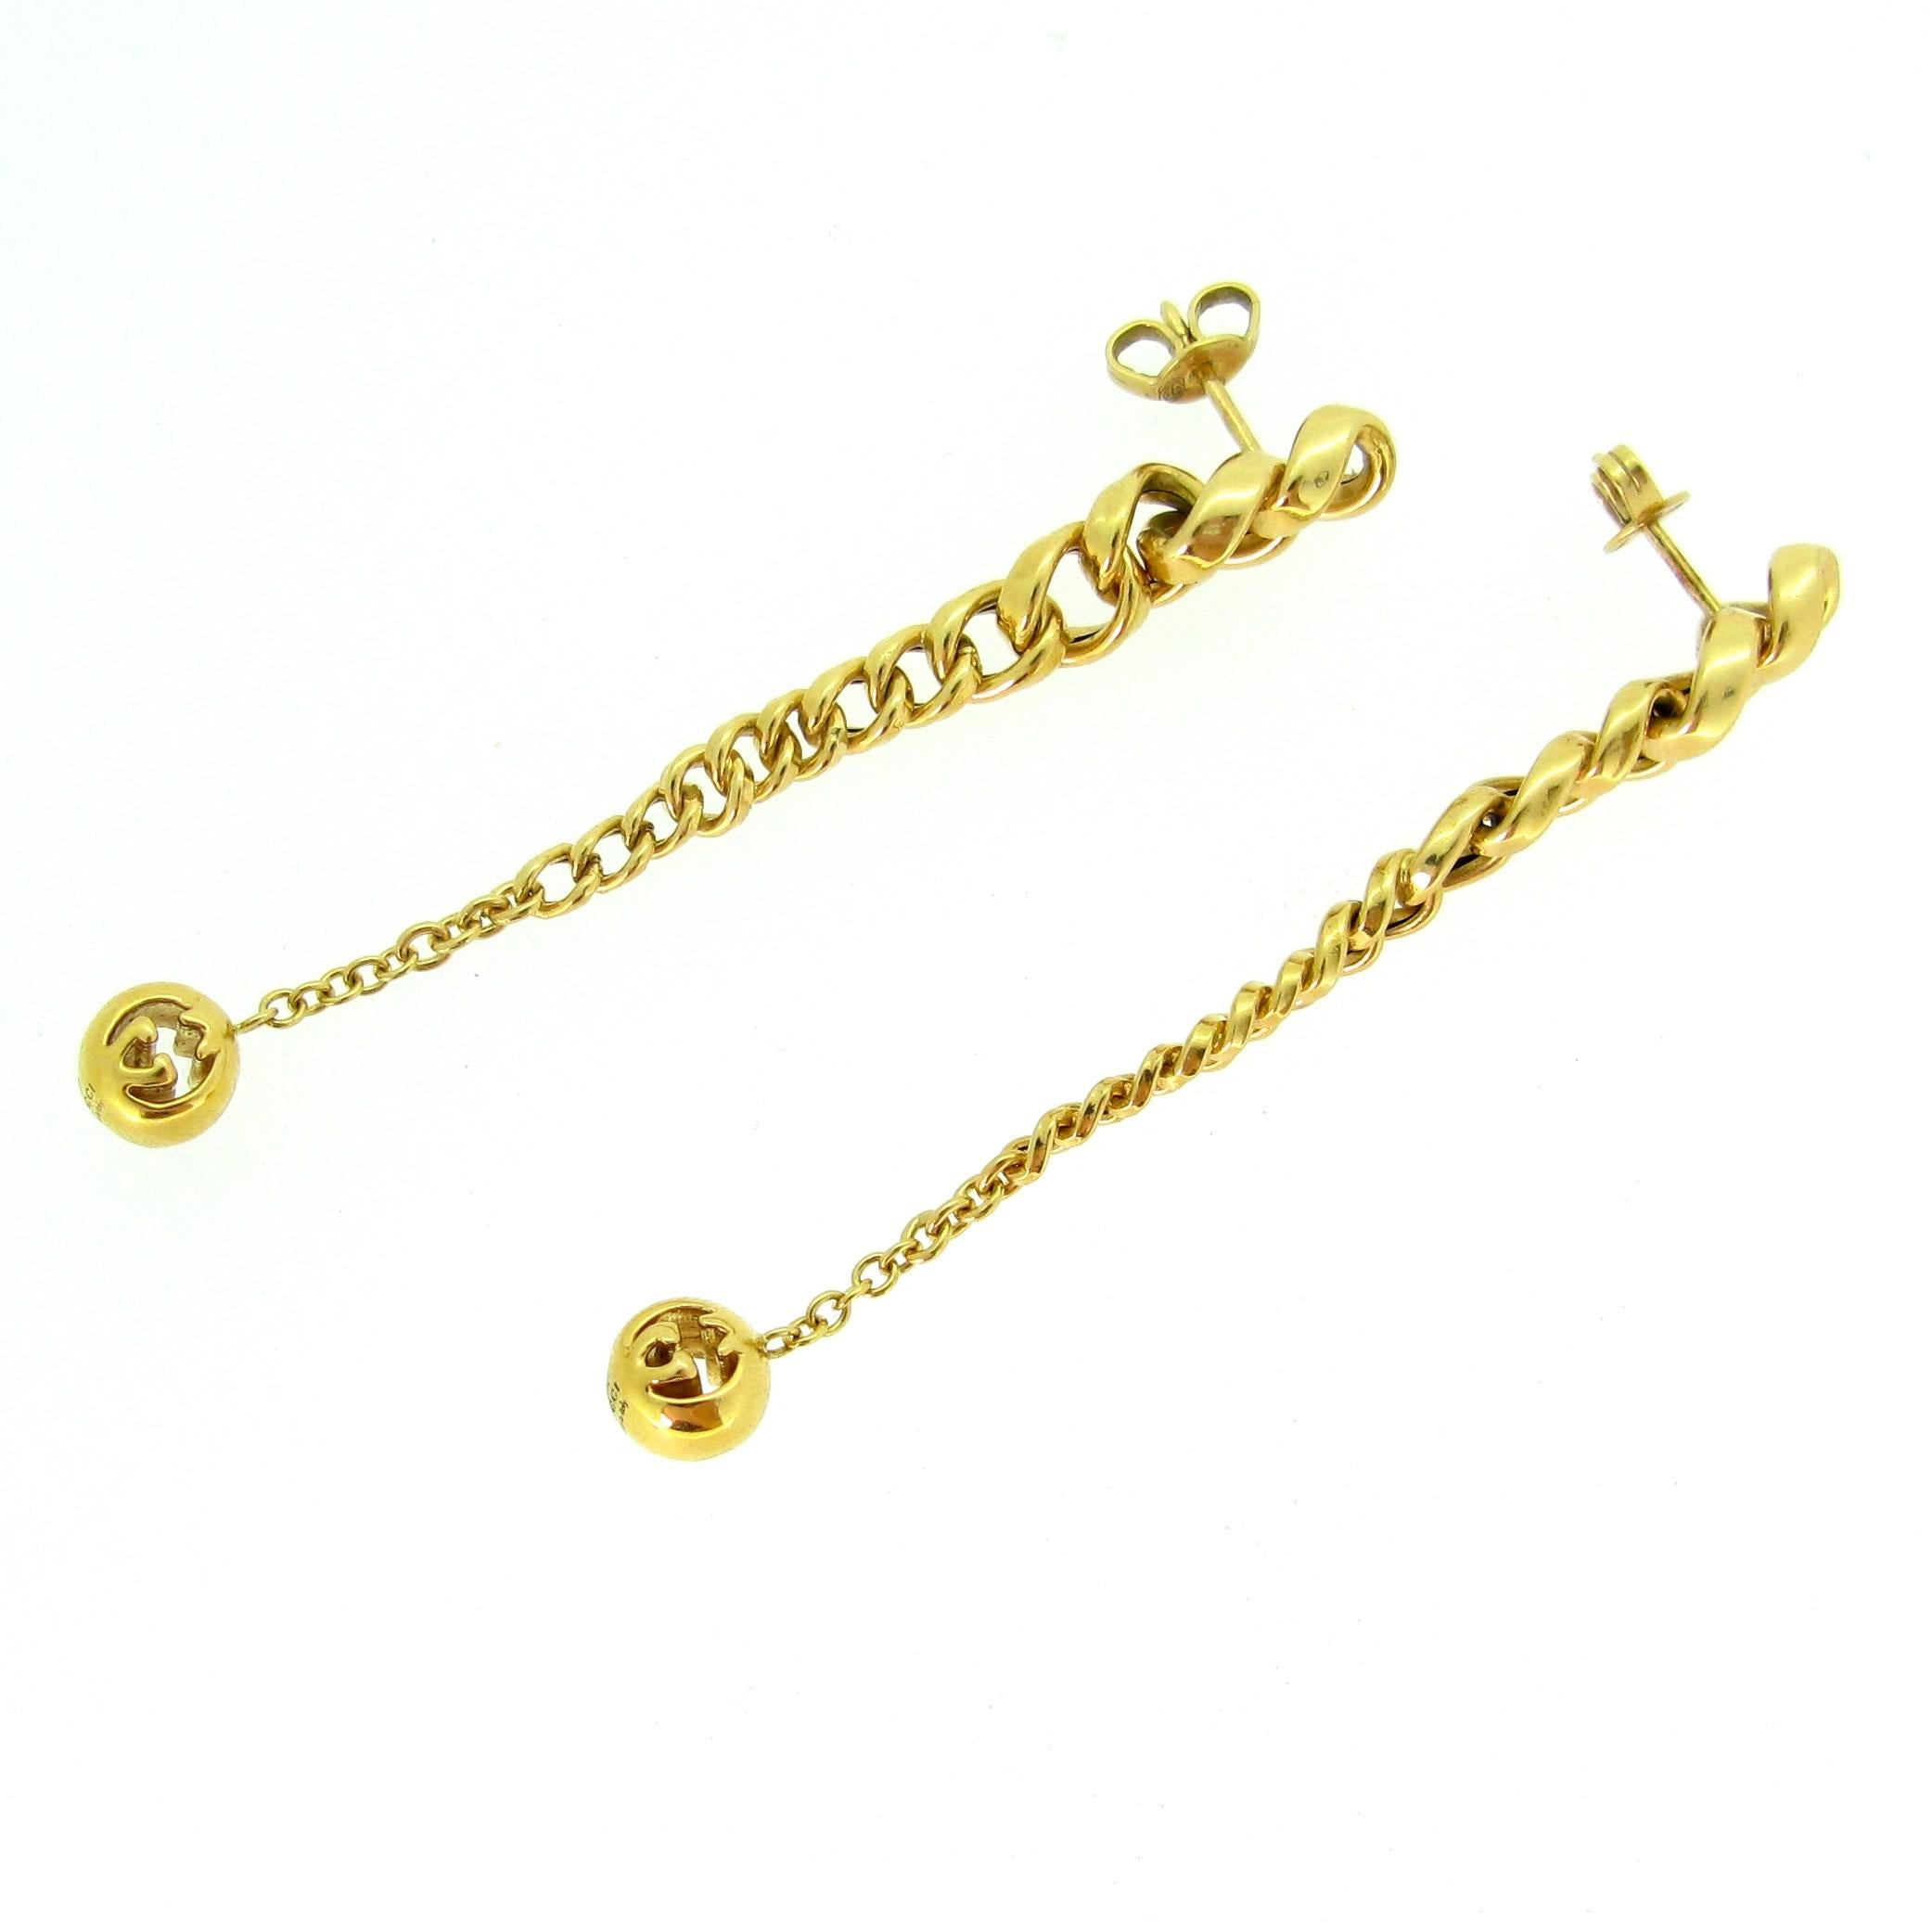 This pair of earrings is signed by the famous Gucci. They are made in 18kt yellow gold. Each earring is made of links forming a long dangling earring – each ball at the bottom shows some cut out work with Gucci’s logo and is signed Gucci